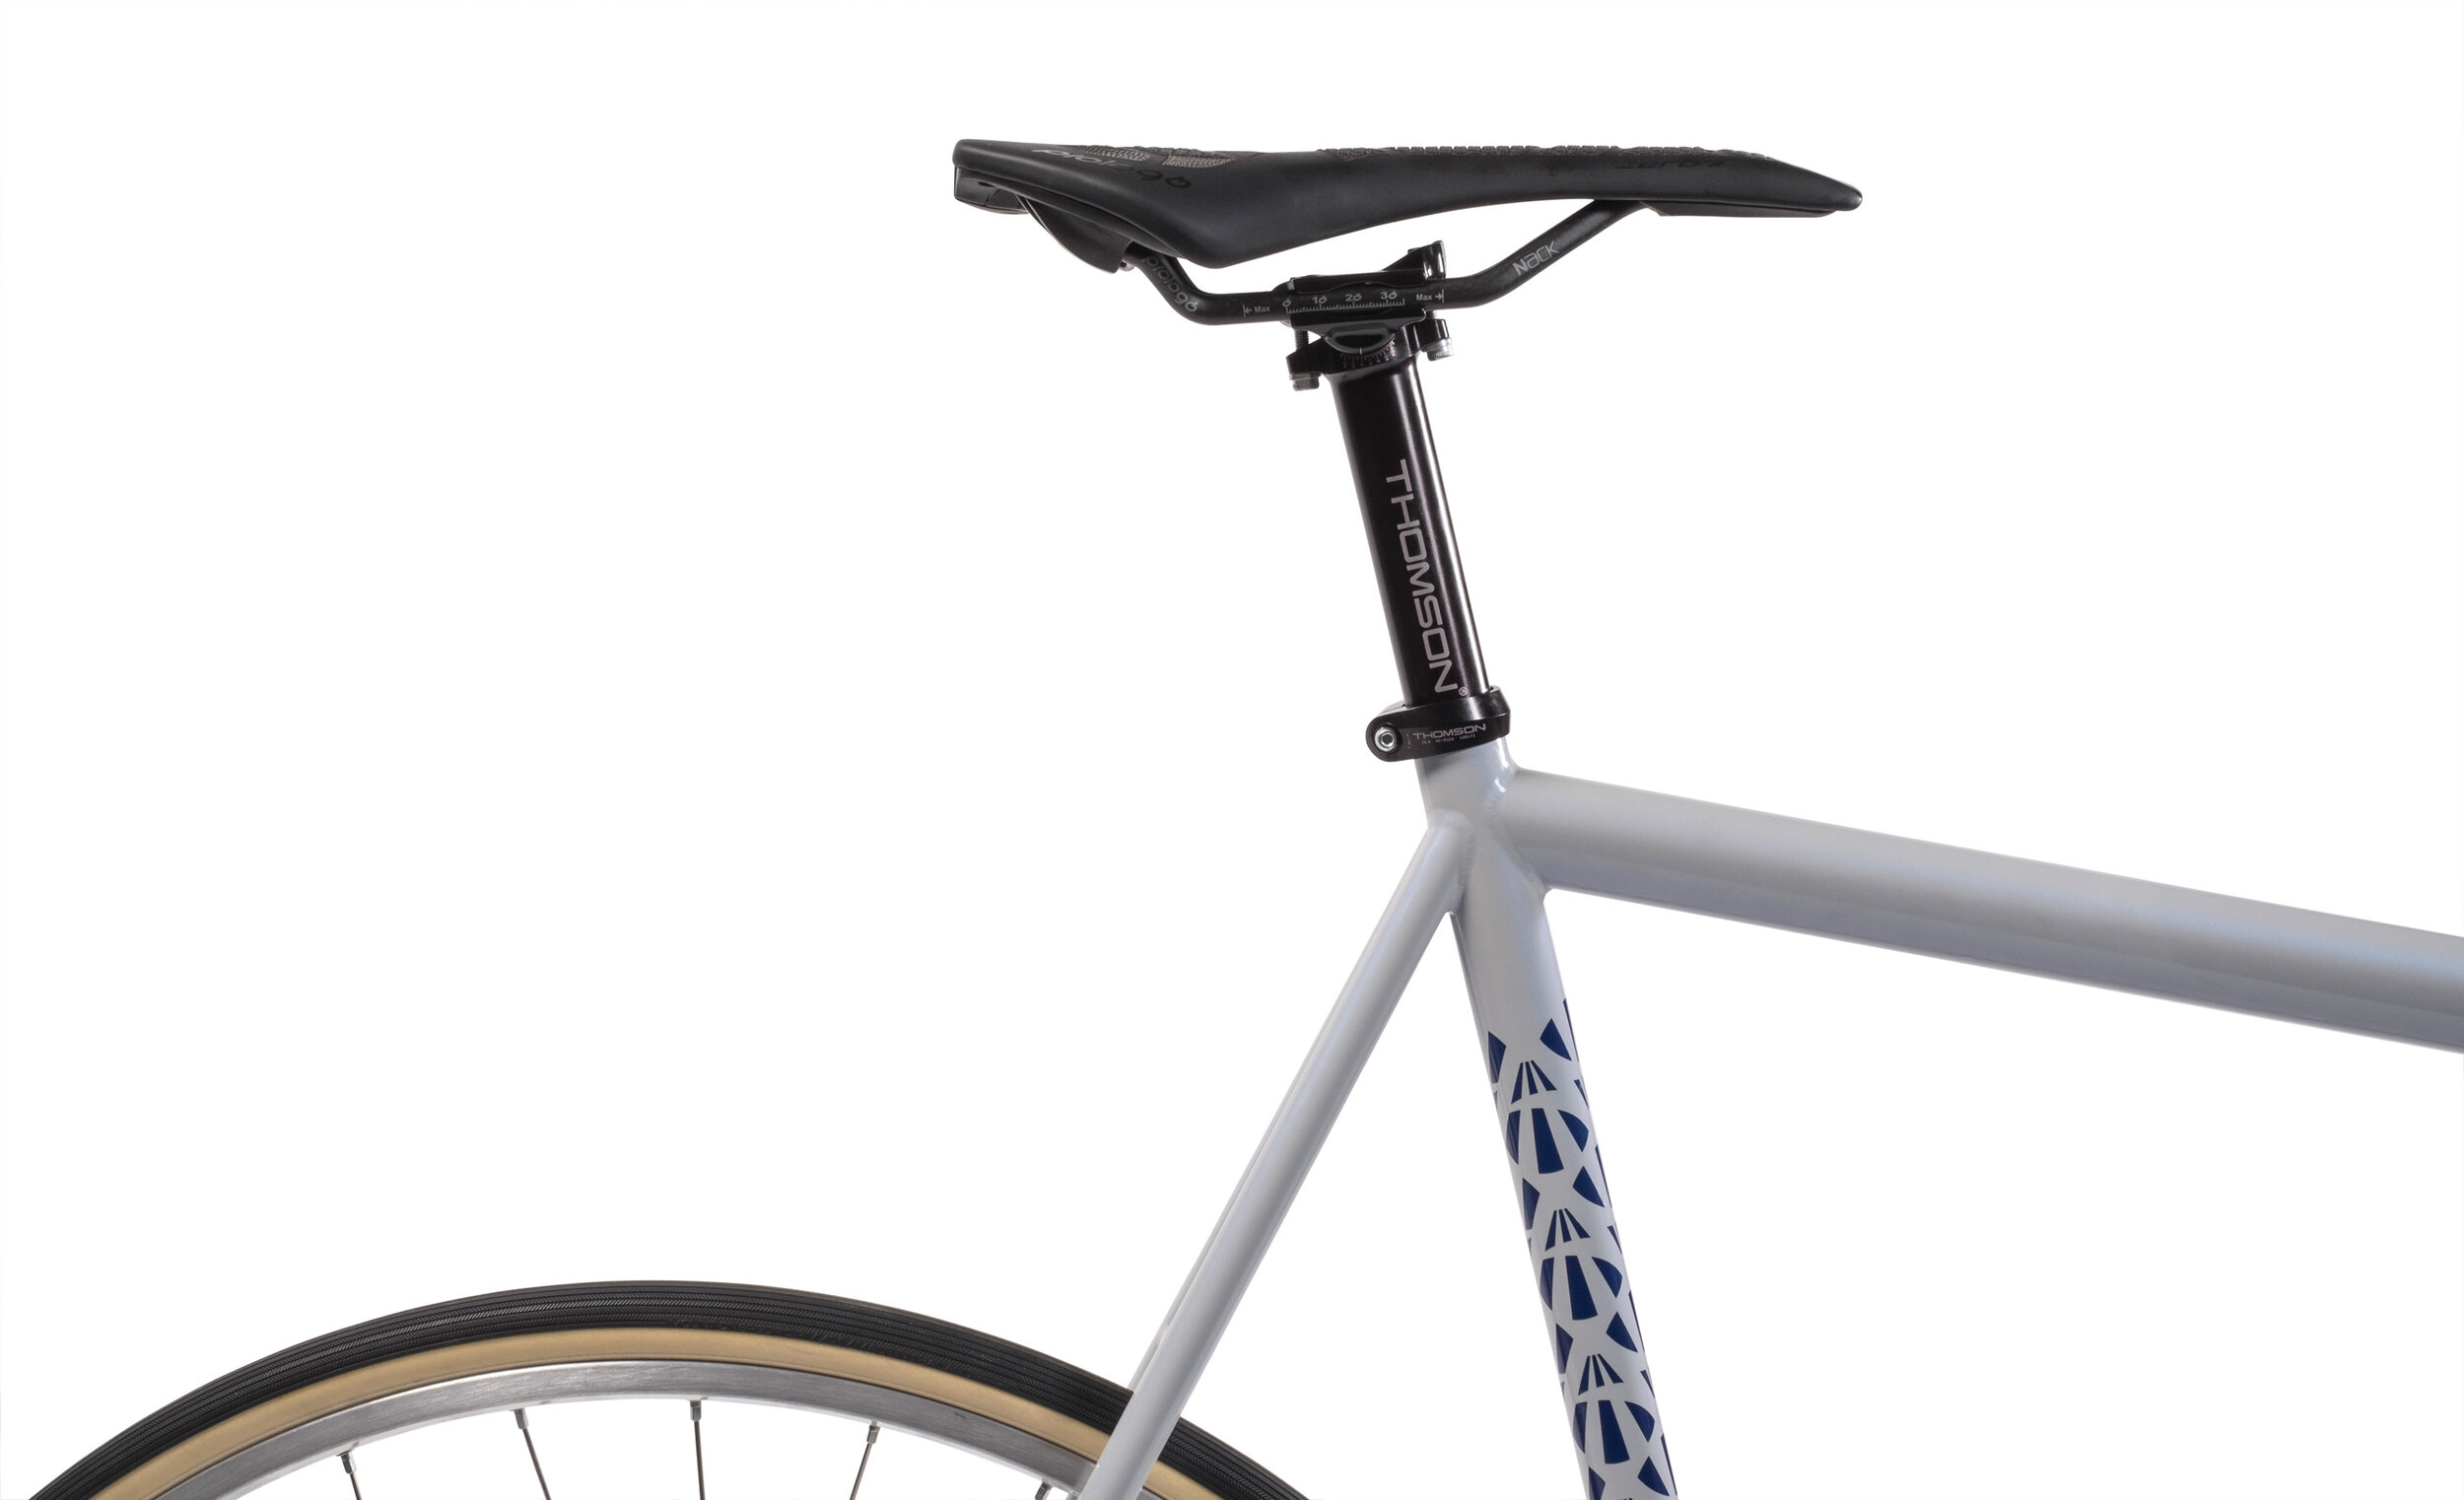 18% Grey Lo Pro frame/fork — AFFINITY CYCLES